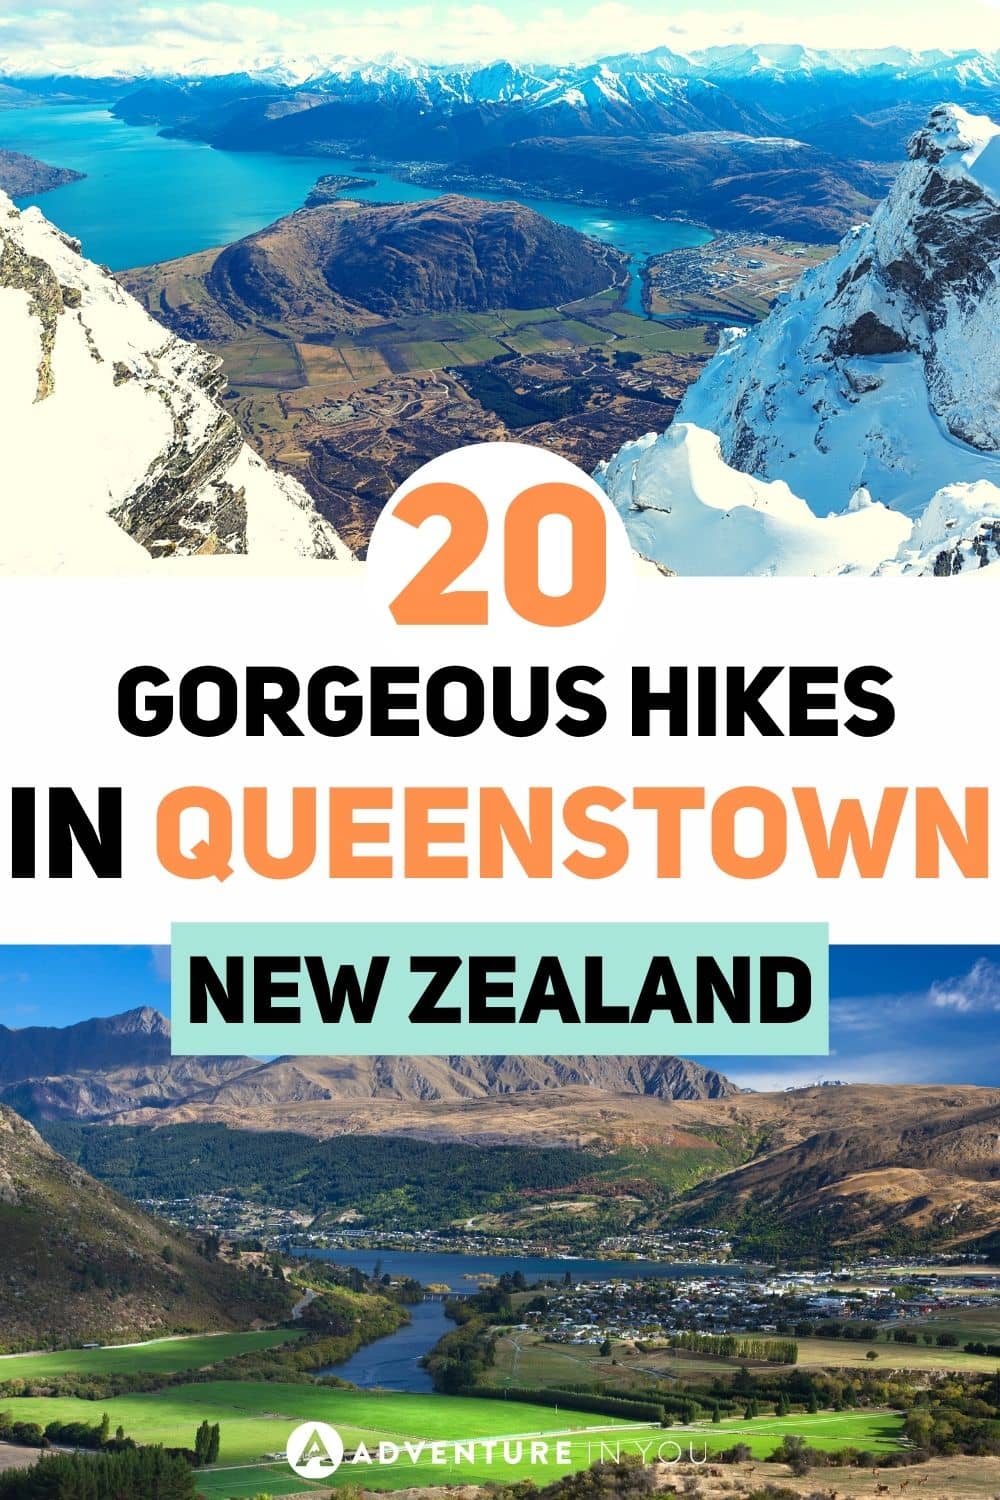 Hiking in Queenstown | If you're taking a holiday in Queenstown, check out these 20 hikes to add to your itinerary!